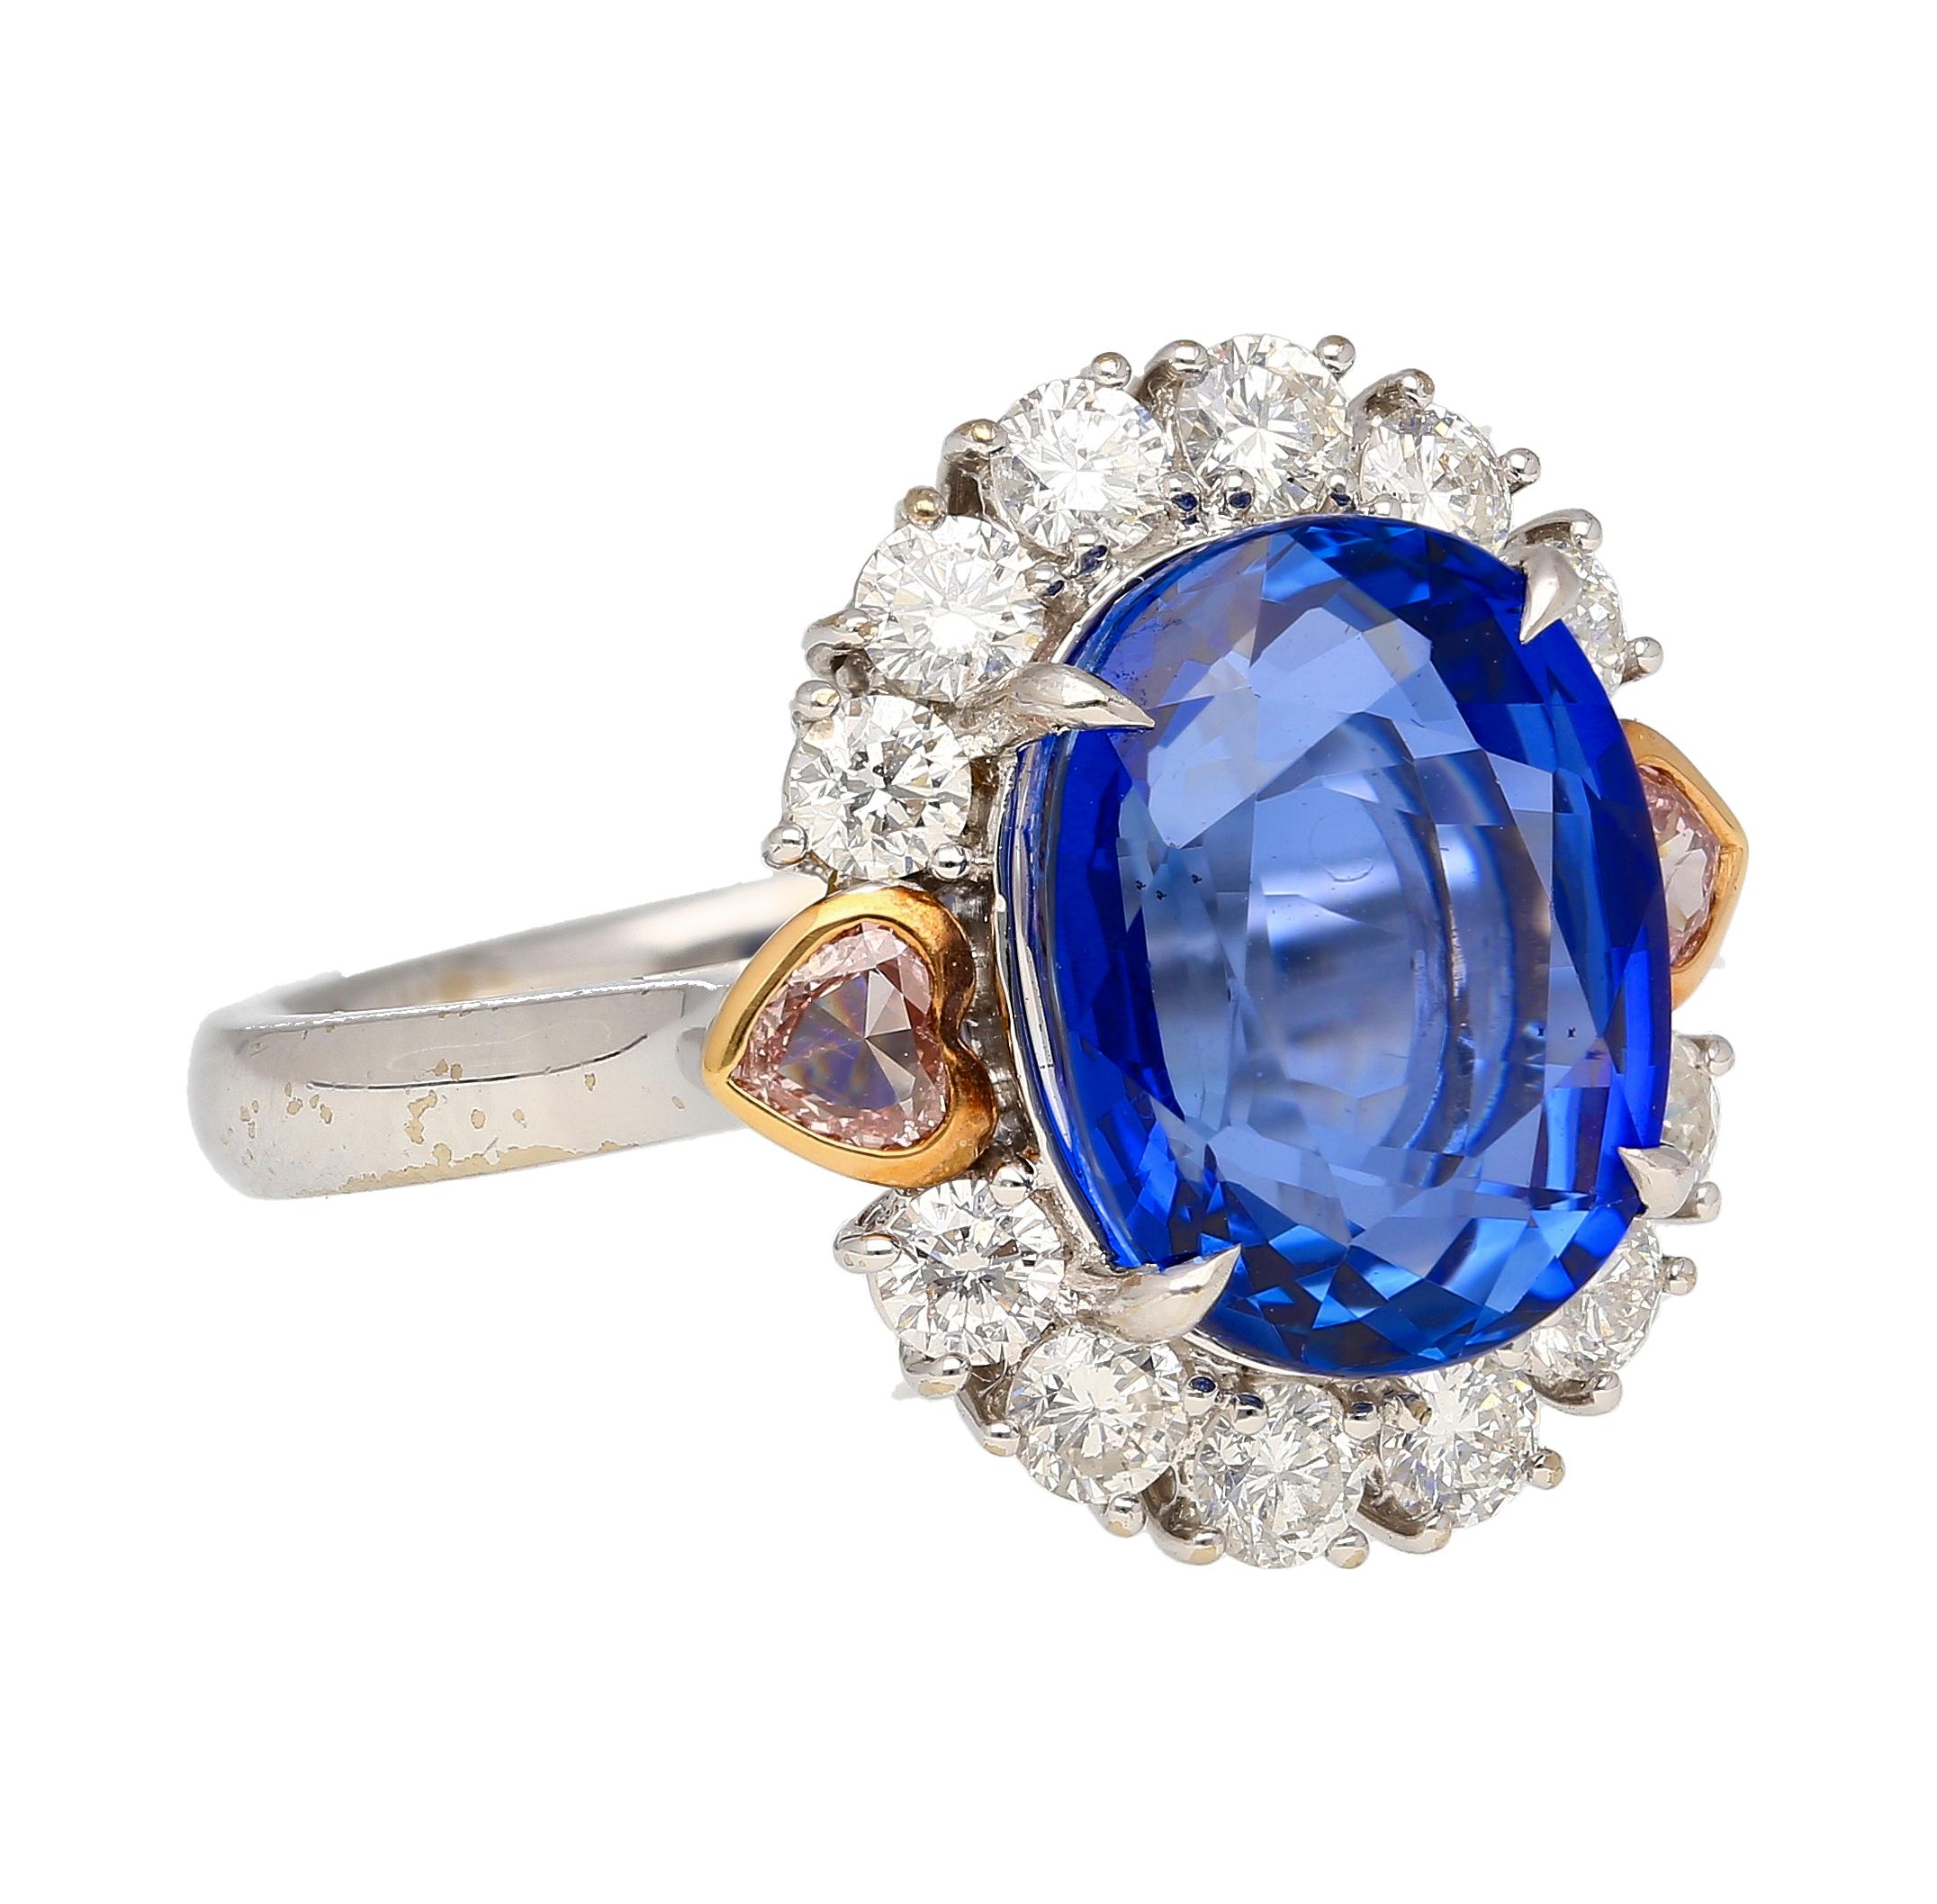 Be enchanted by the captivating beauty of this multi-stone ring, featuring a GRS certified No Heat 7.25-carat oval cut natural Blue Sapphire.

Flanked by two bezel set heart-cut pink diamonds and twelve round cut white diamonds that form a halo